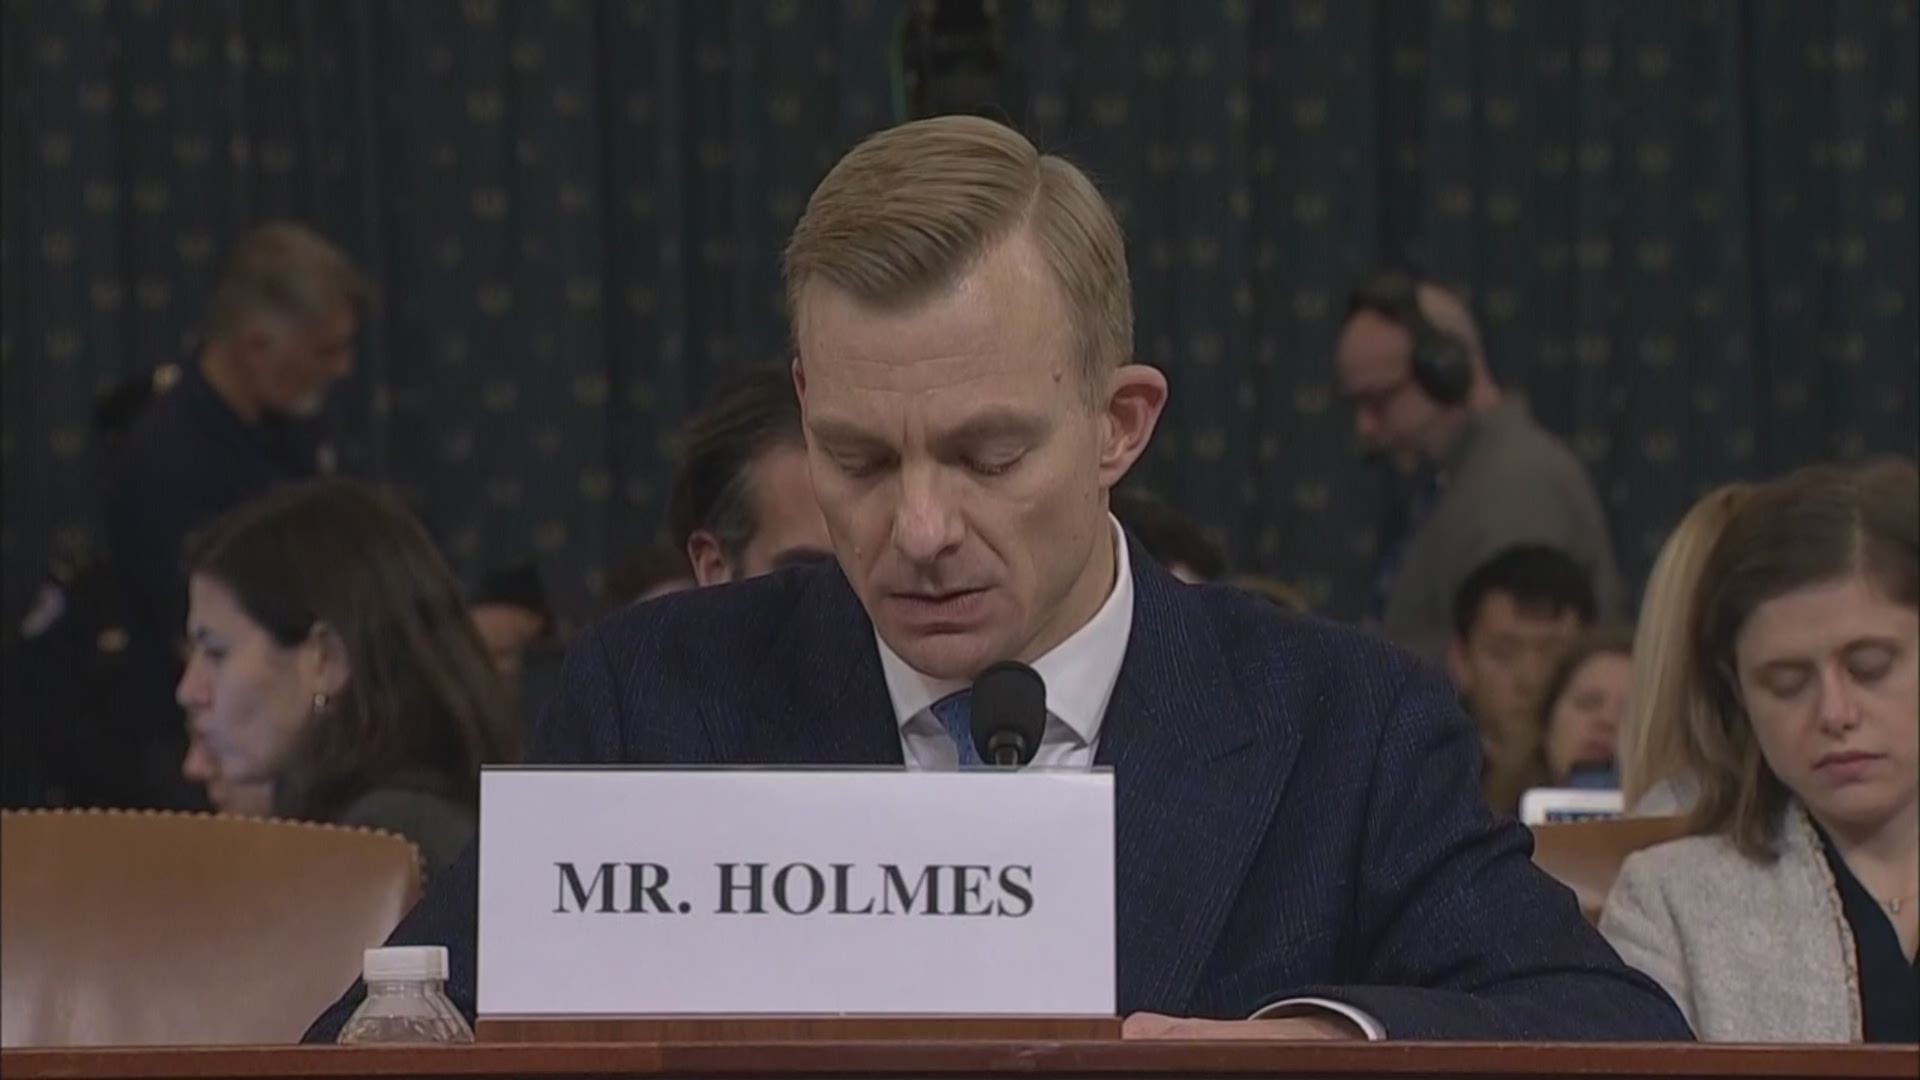 Holmes says he was at lunch with Ambassador Gordon Sondland when he overheard him talking with President Trump about the Ukrainian president.